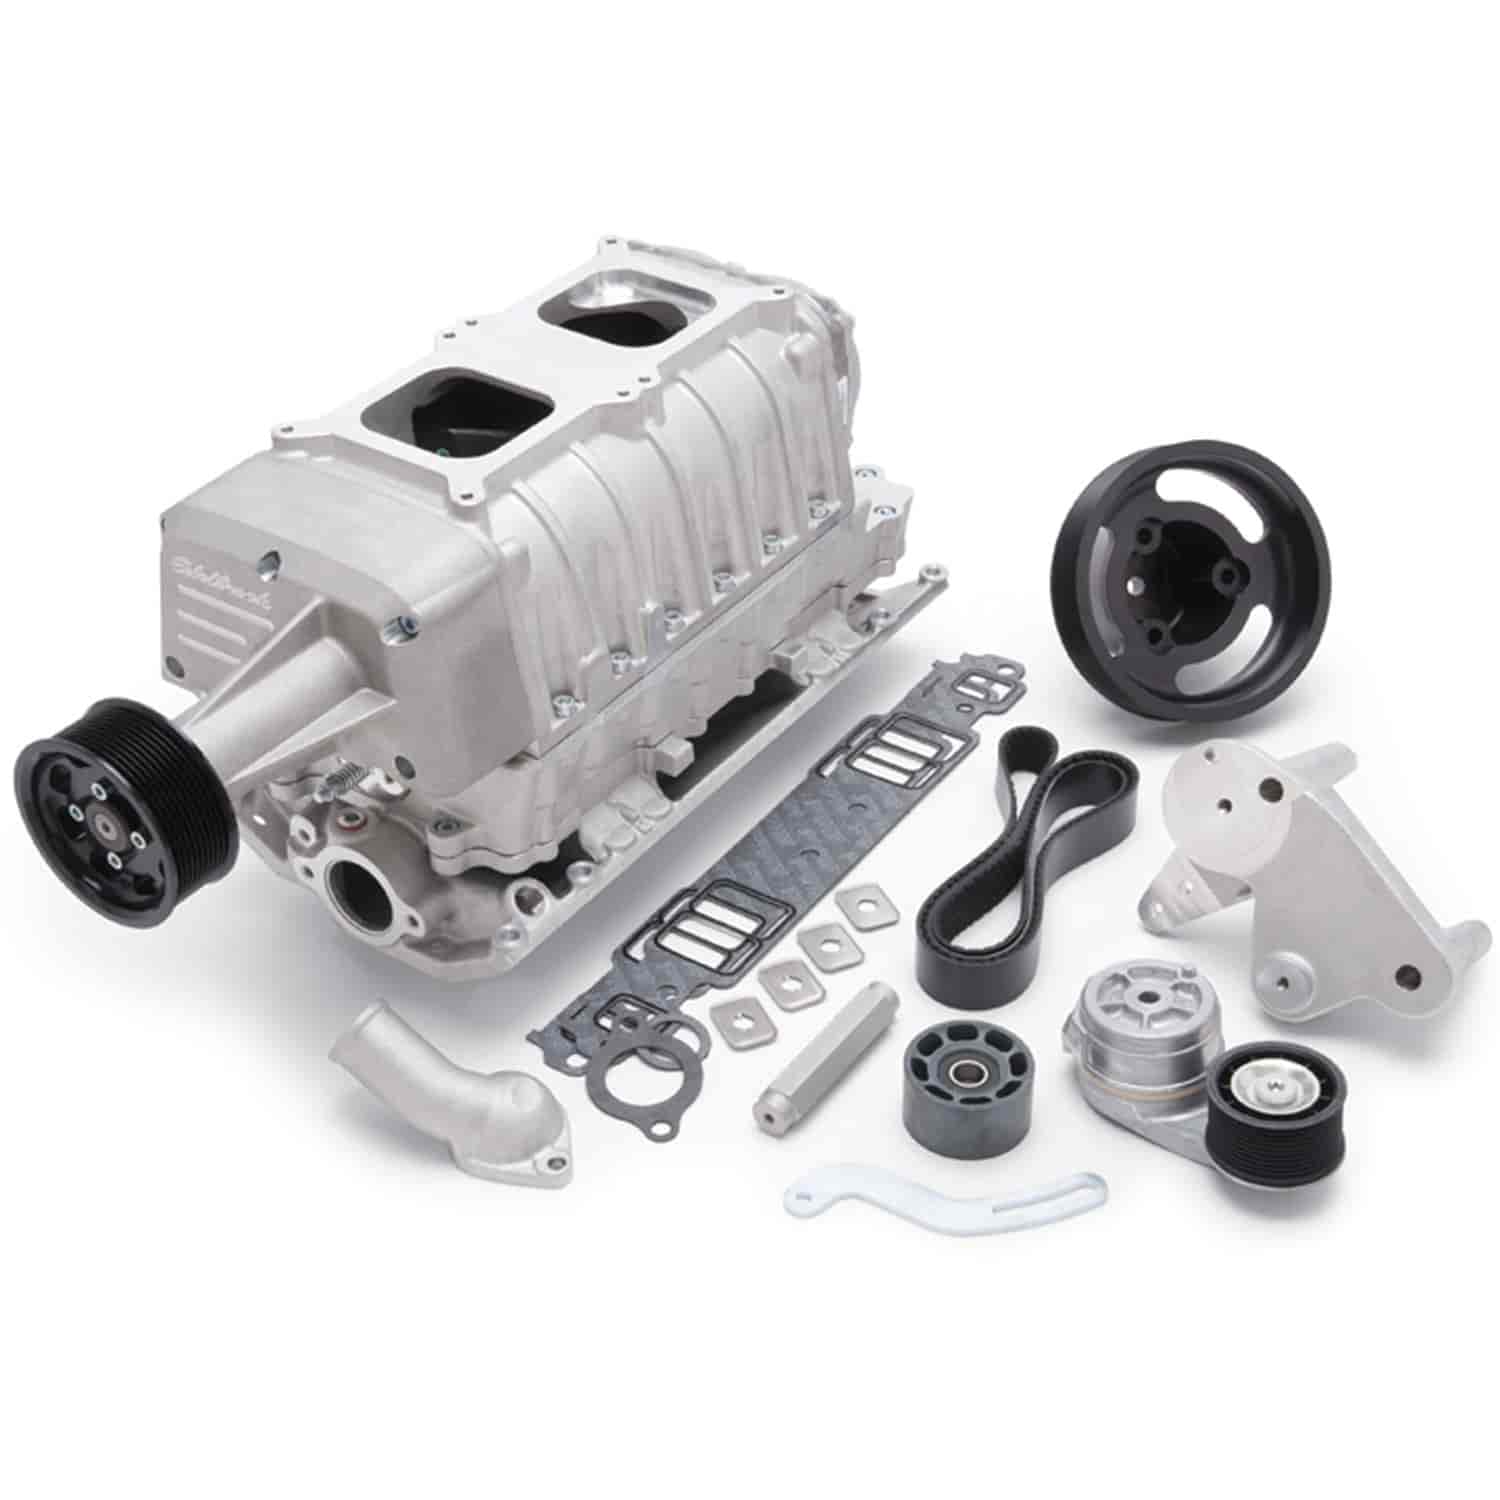 E-Force Enforcer RPM Dual Quad Satin Supercharger Kit for Small Block Chevy with Vortec Heads